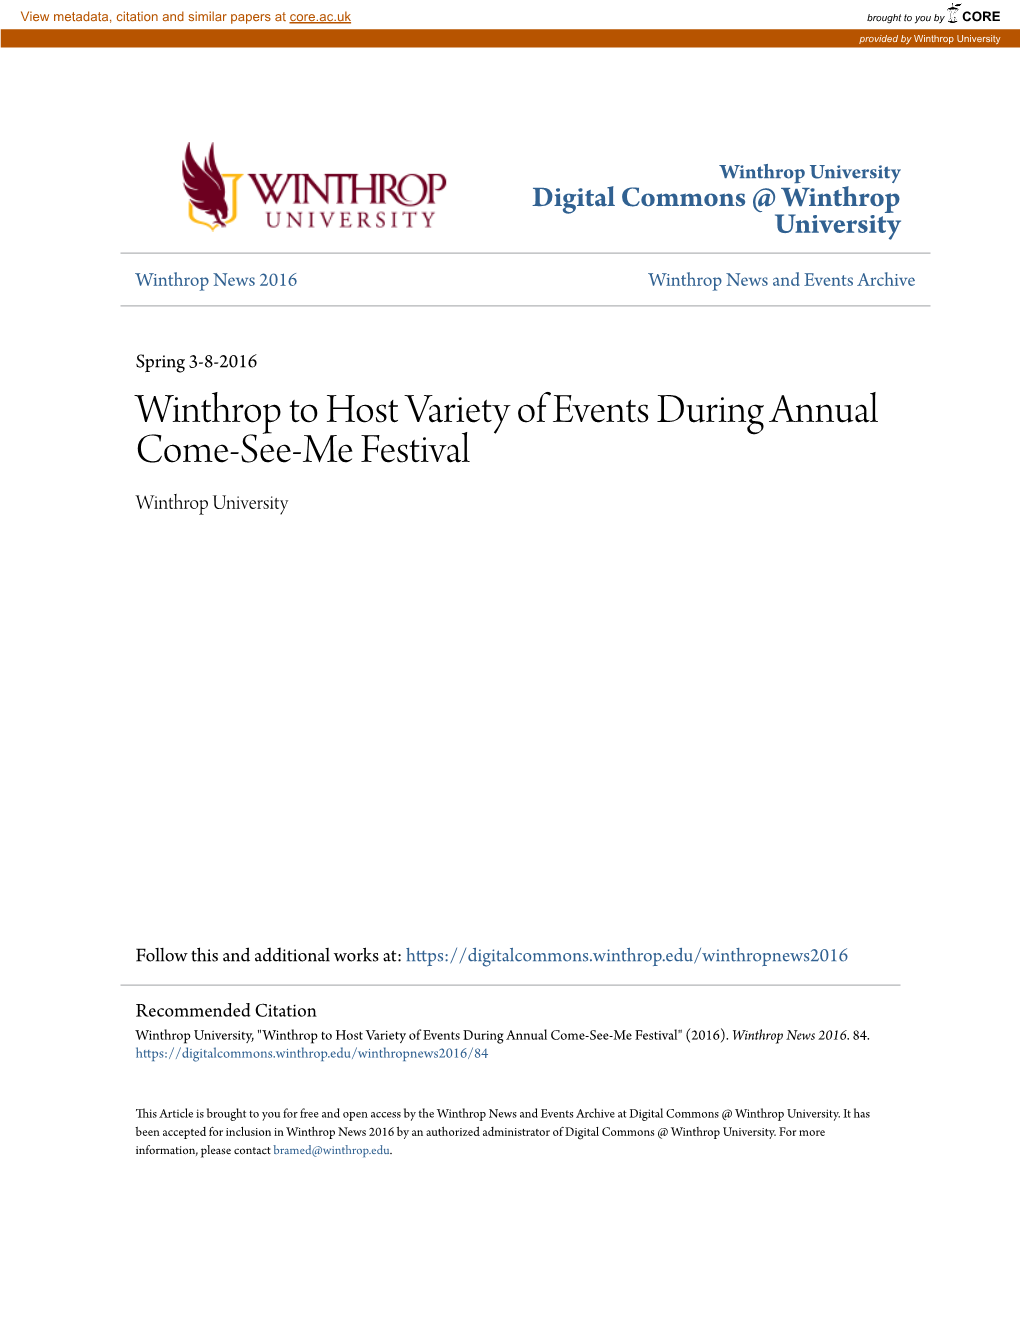 Winthrop to Host Variety of Events During Annual Come-See-Me Festival Winthrop University